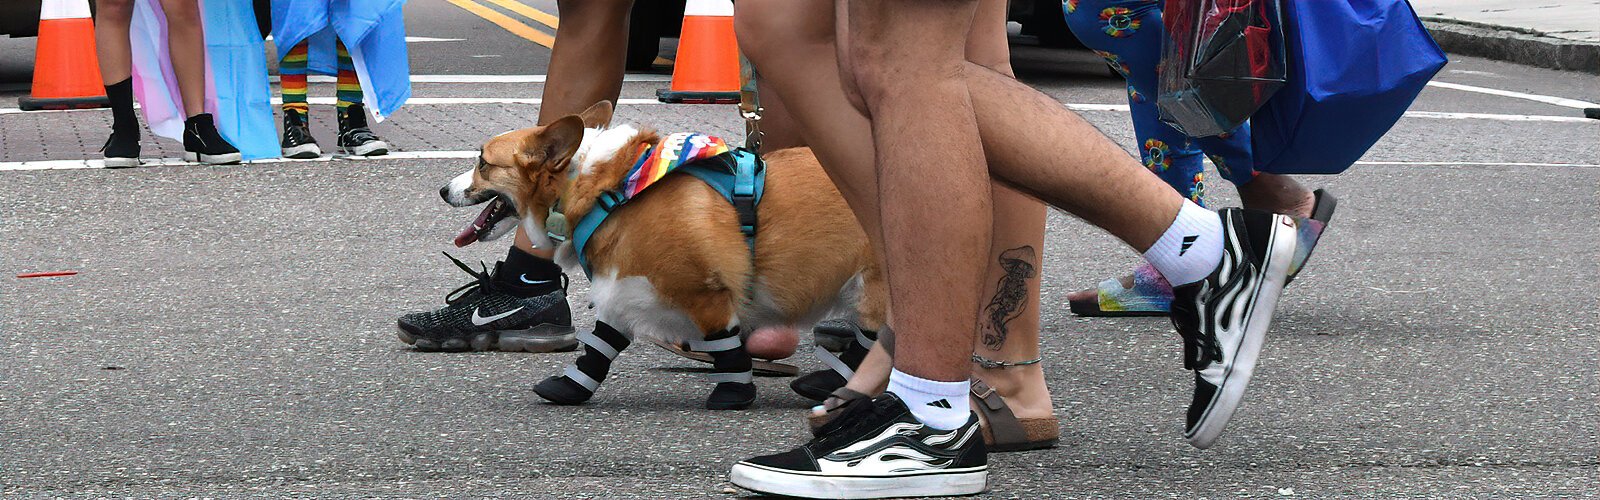 With temperatures above 90 degrees, the asphalt can burn a dog’s paws but this pride scarf-wearing pooch is well protected to walk the hot pavement with its caring humans.